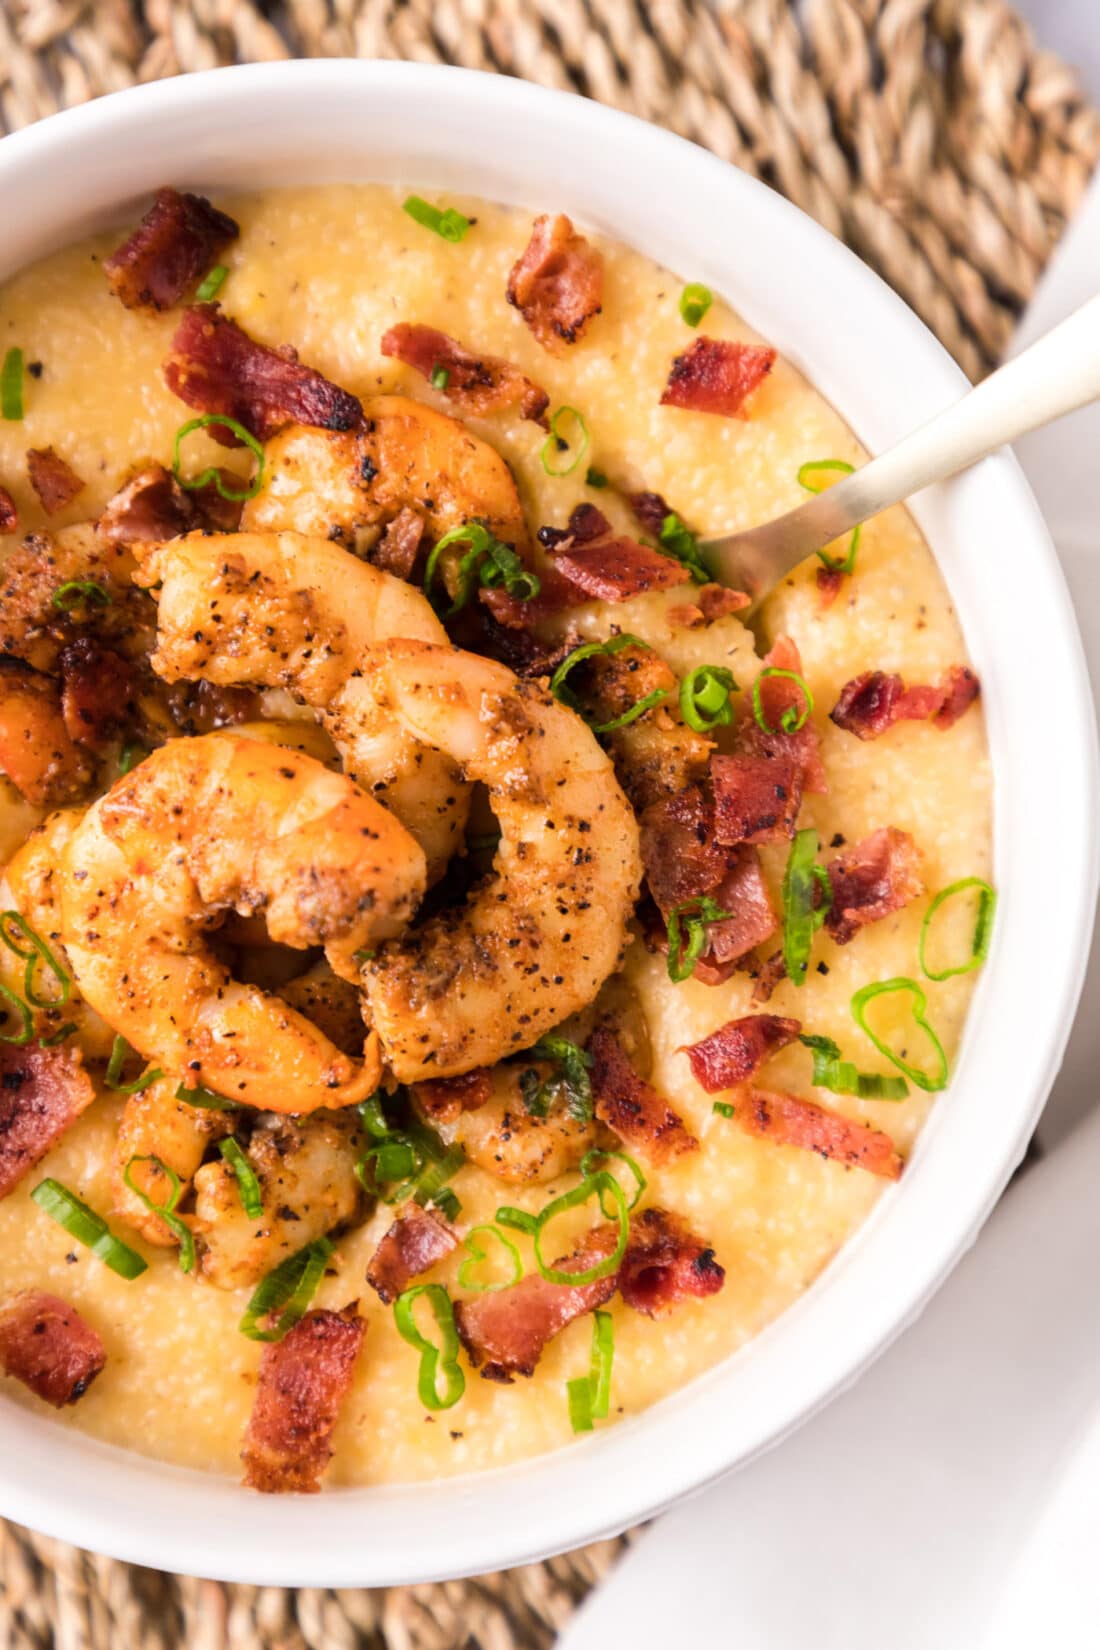 Bowl of Shrimp and Grits